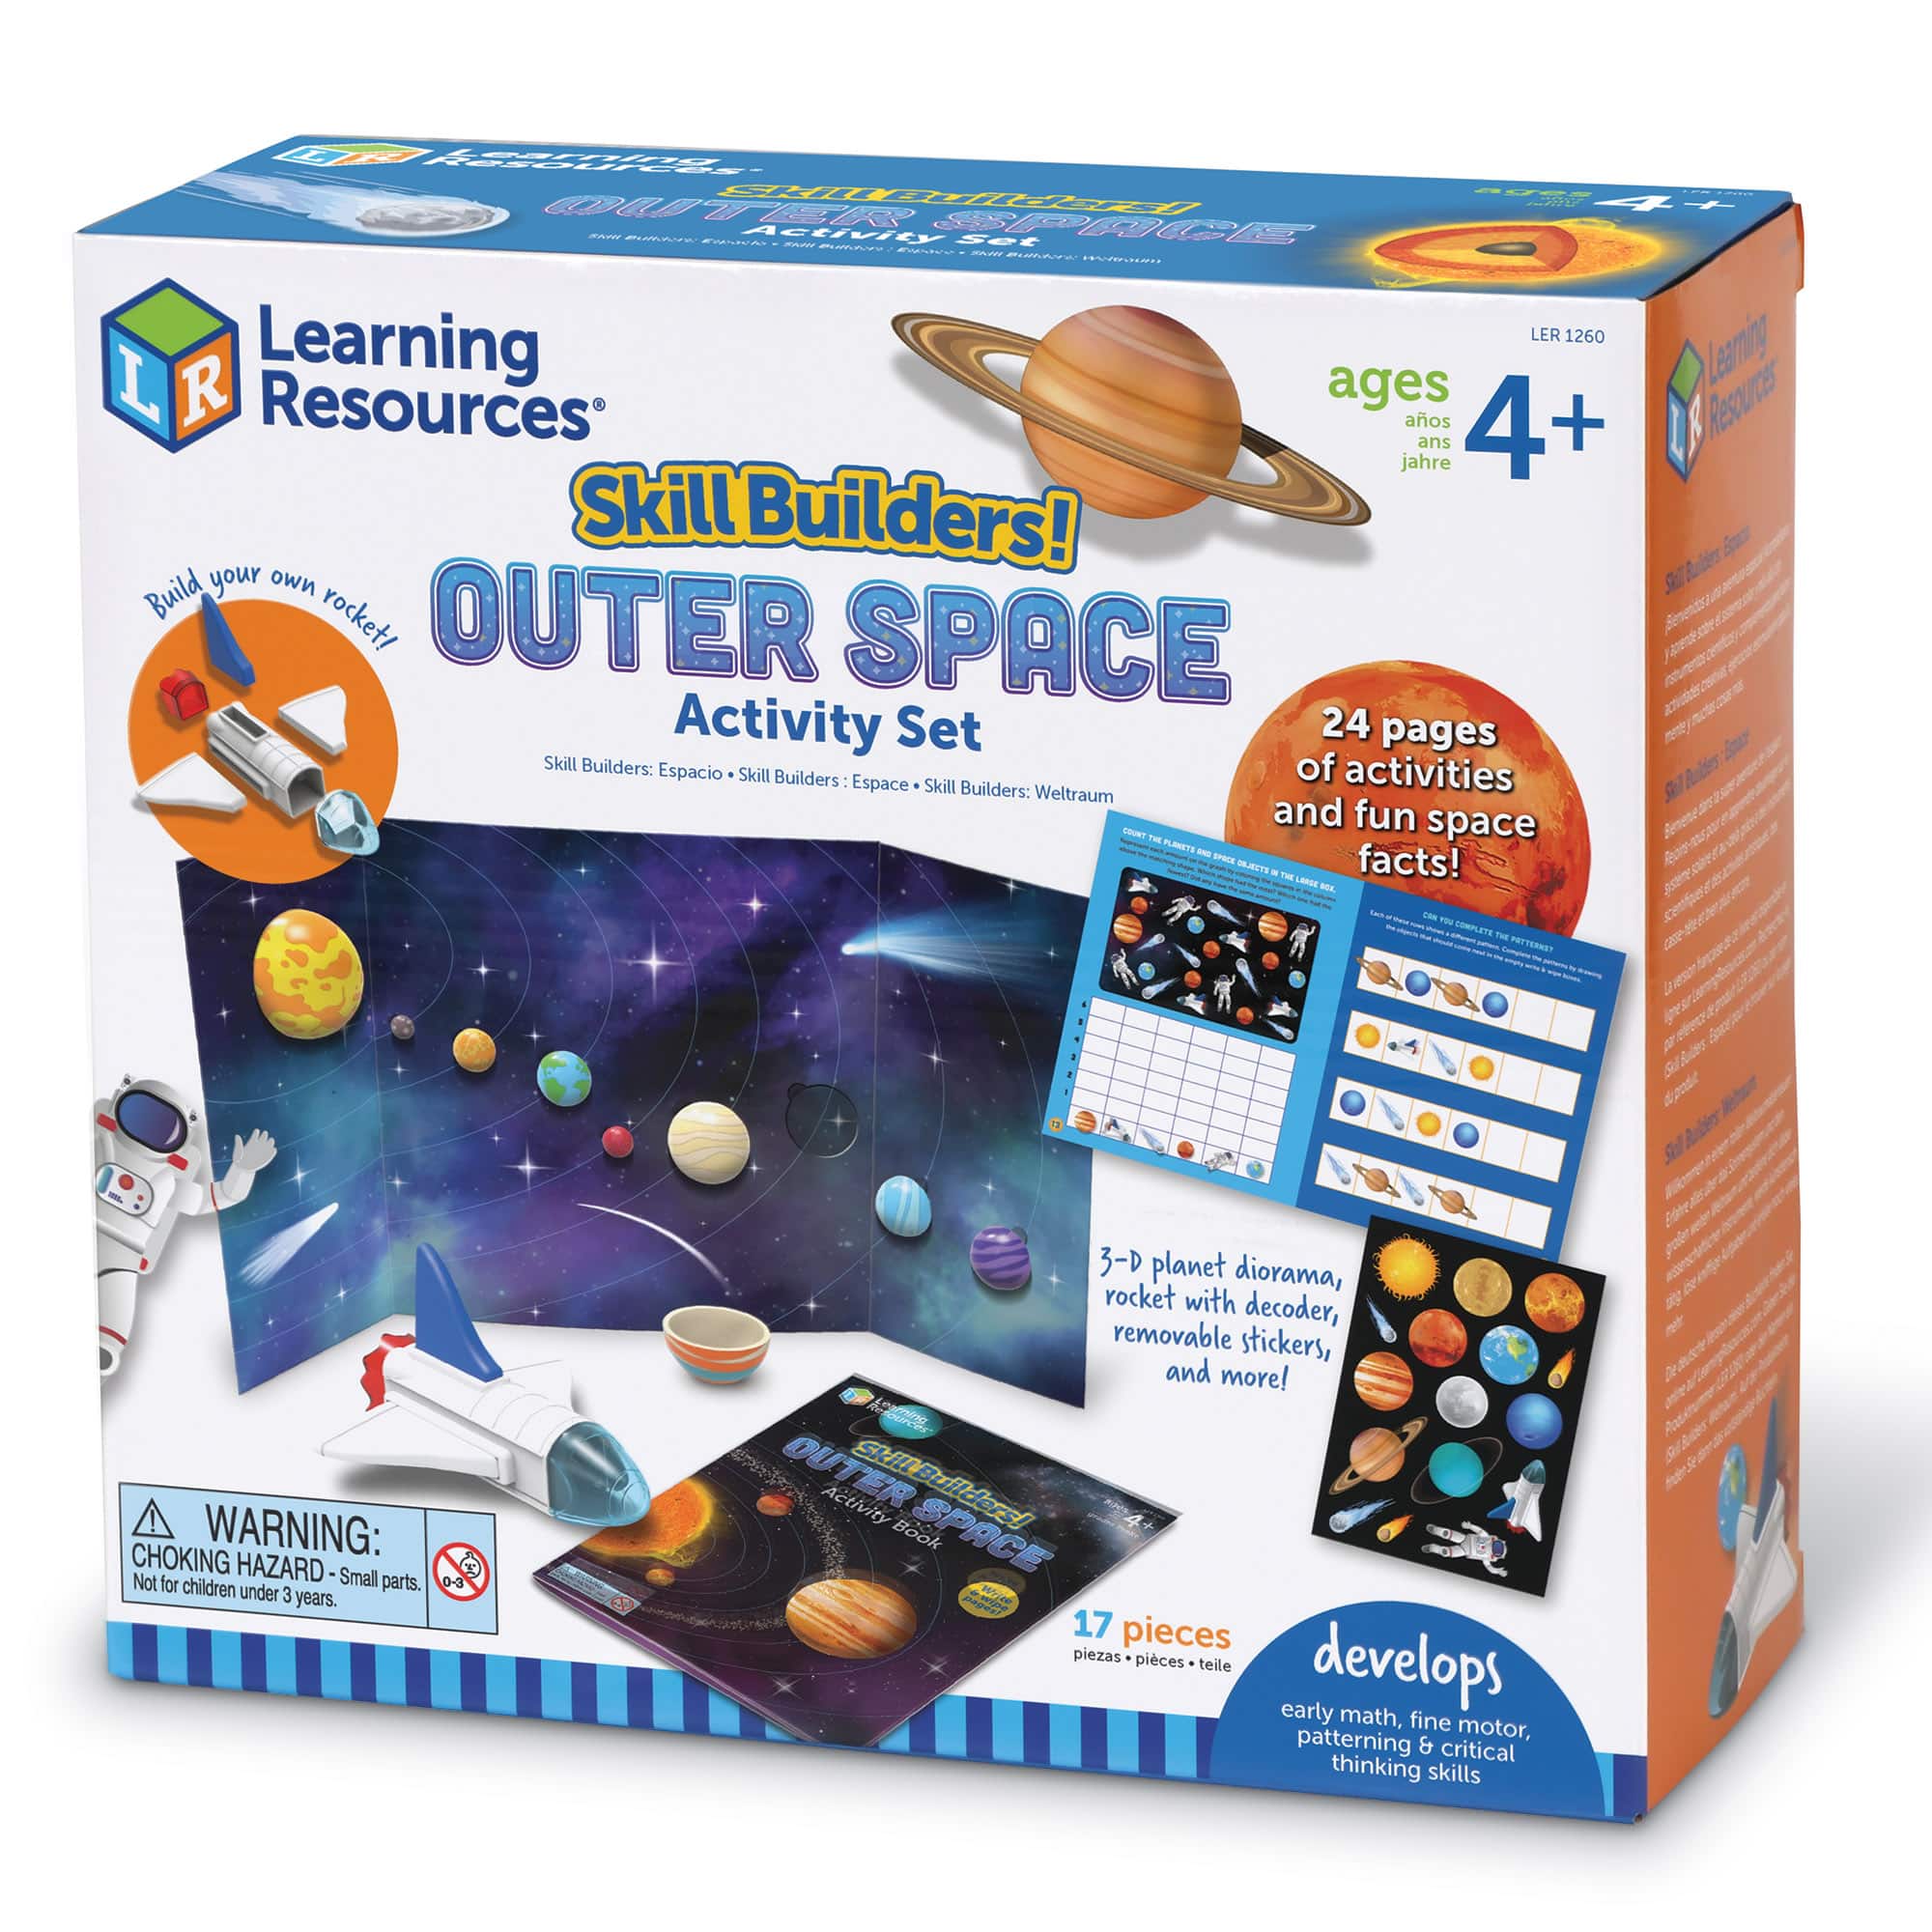 Learning Resources Skill Builders Outer Space Activity Set